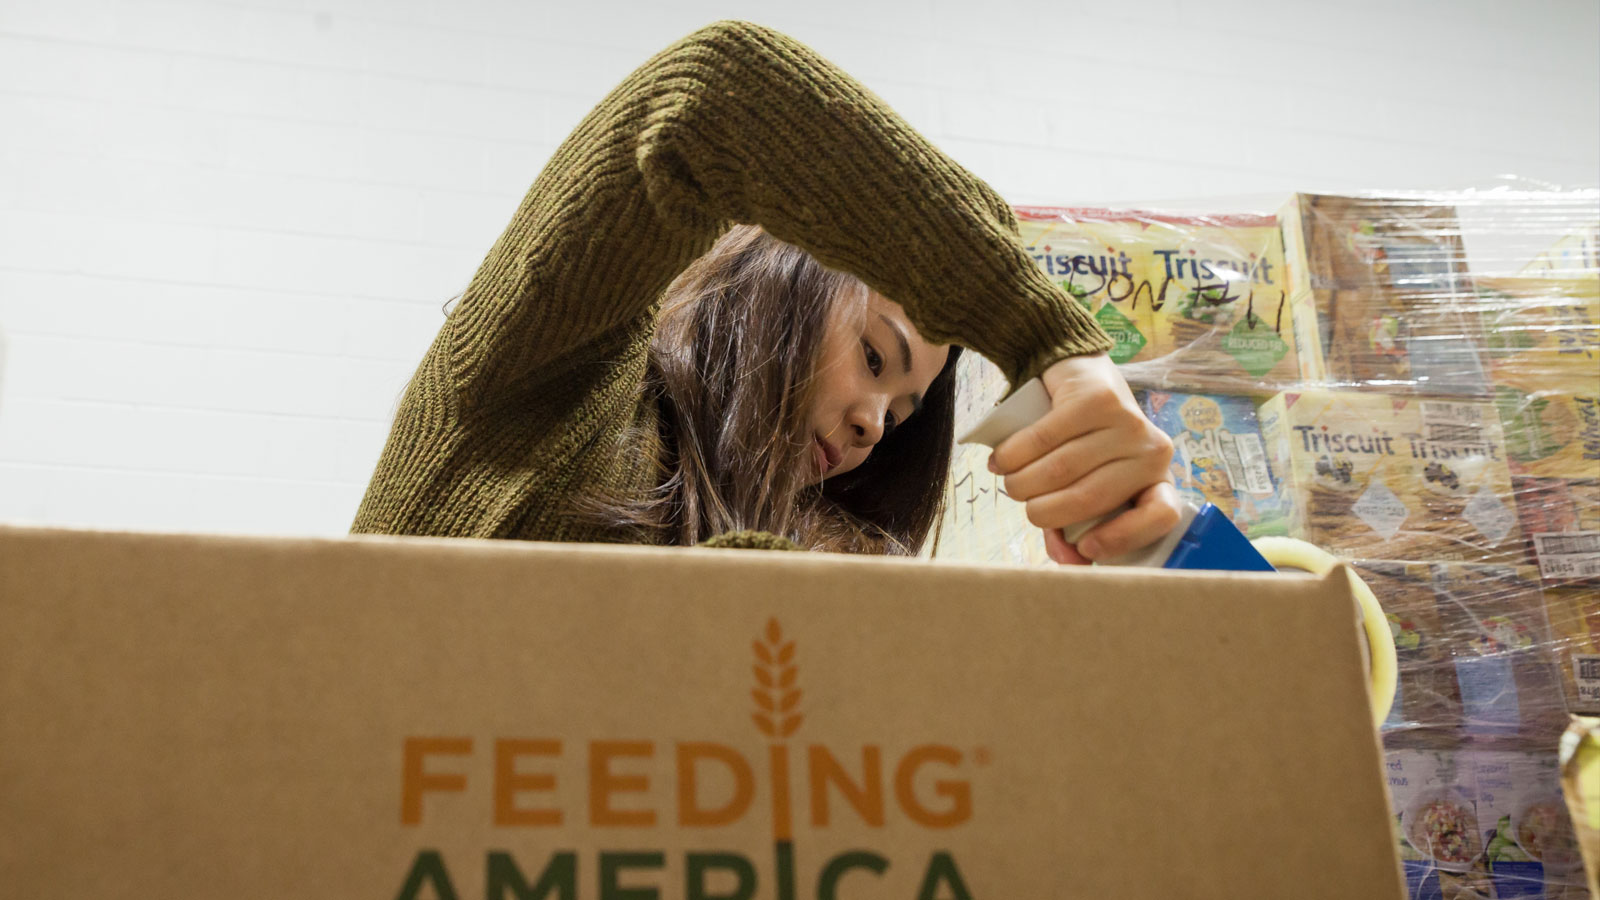 A Lawrence student packages supplies during a volunteer shift at Feeding America.